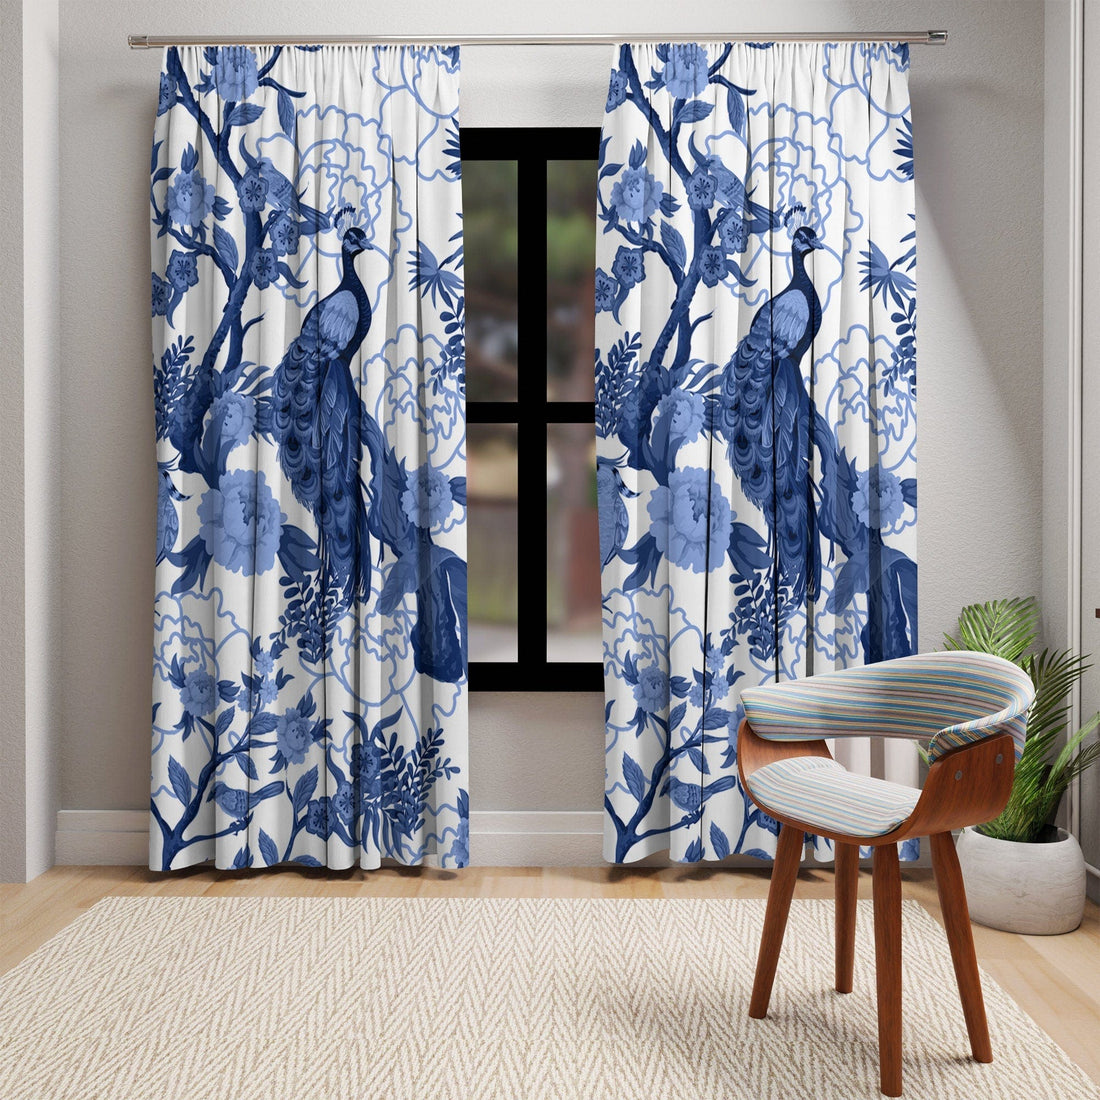 Kate McEnroe New York Elegant Chinoiserie Floral Peacock Window Curtains, Blue and White Botanical Toile Panels with Peacocks and Jungle MotifsWindow CurtainsW3S - PEA - COK - SH4